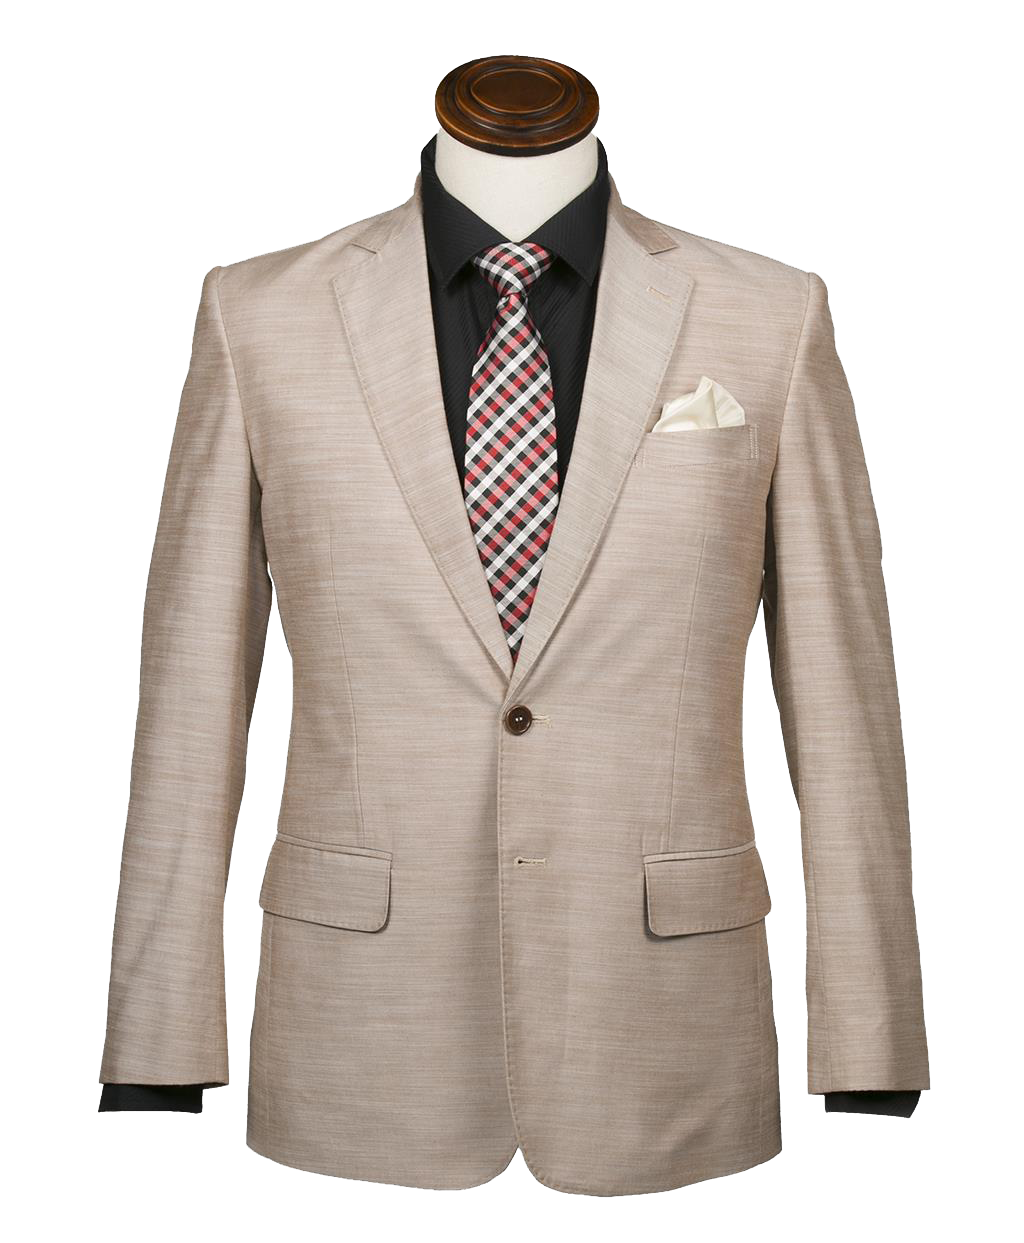 Blazer PNG Images With Transparent Background